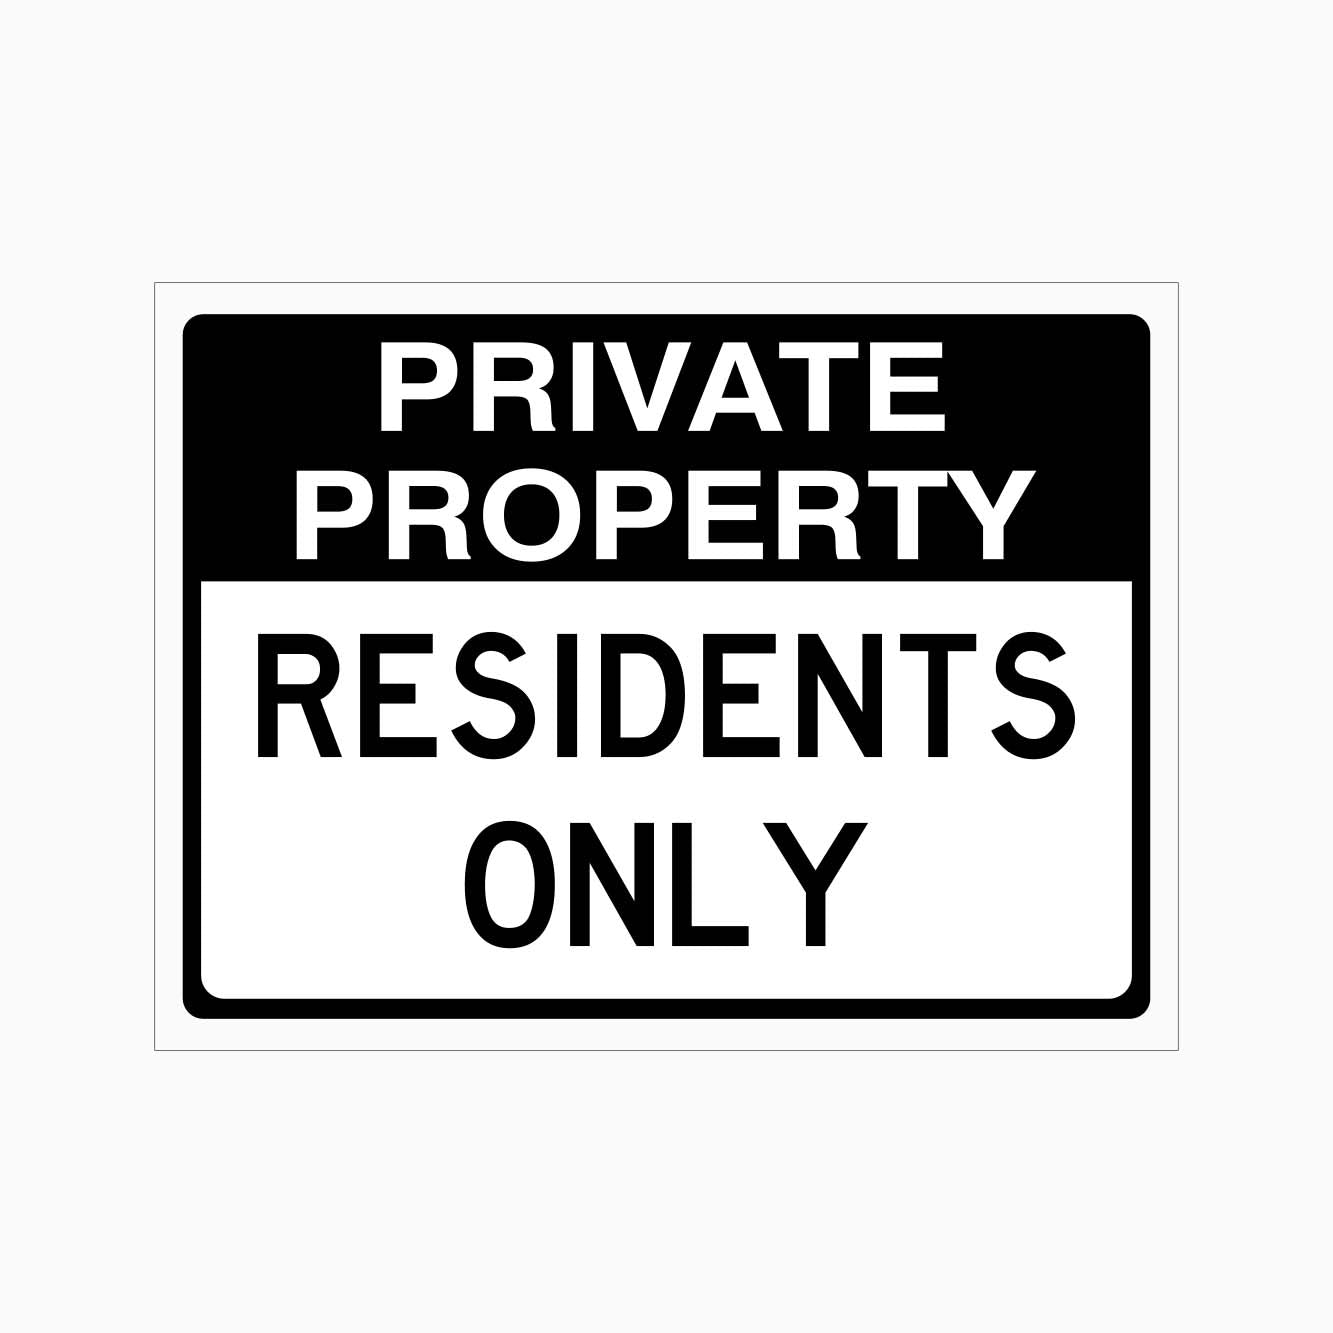 PRIVATE PROPERTY RESIDENTS ONLY SIGN - GET SIGNS